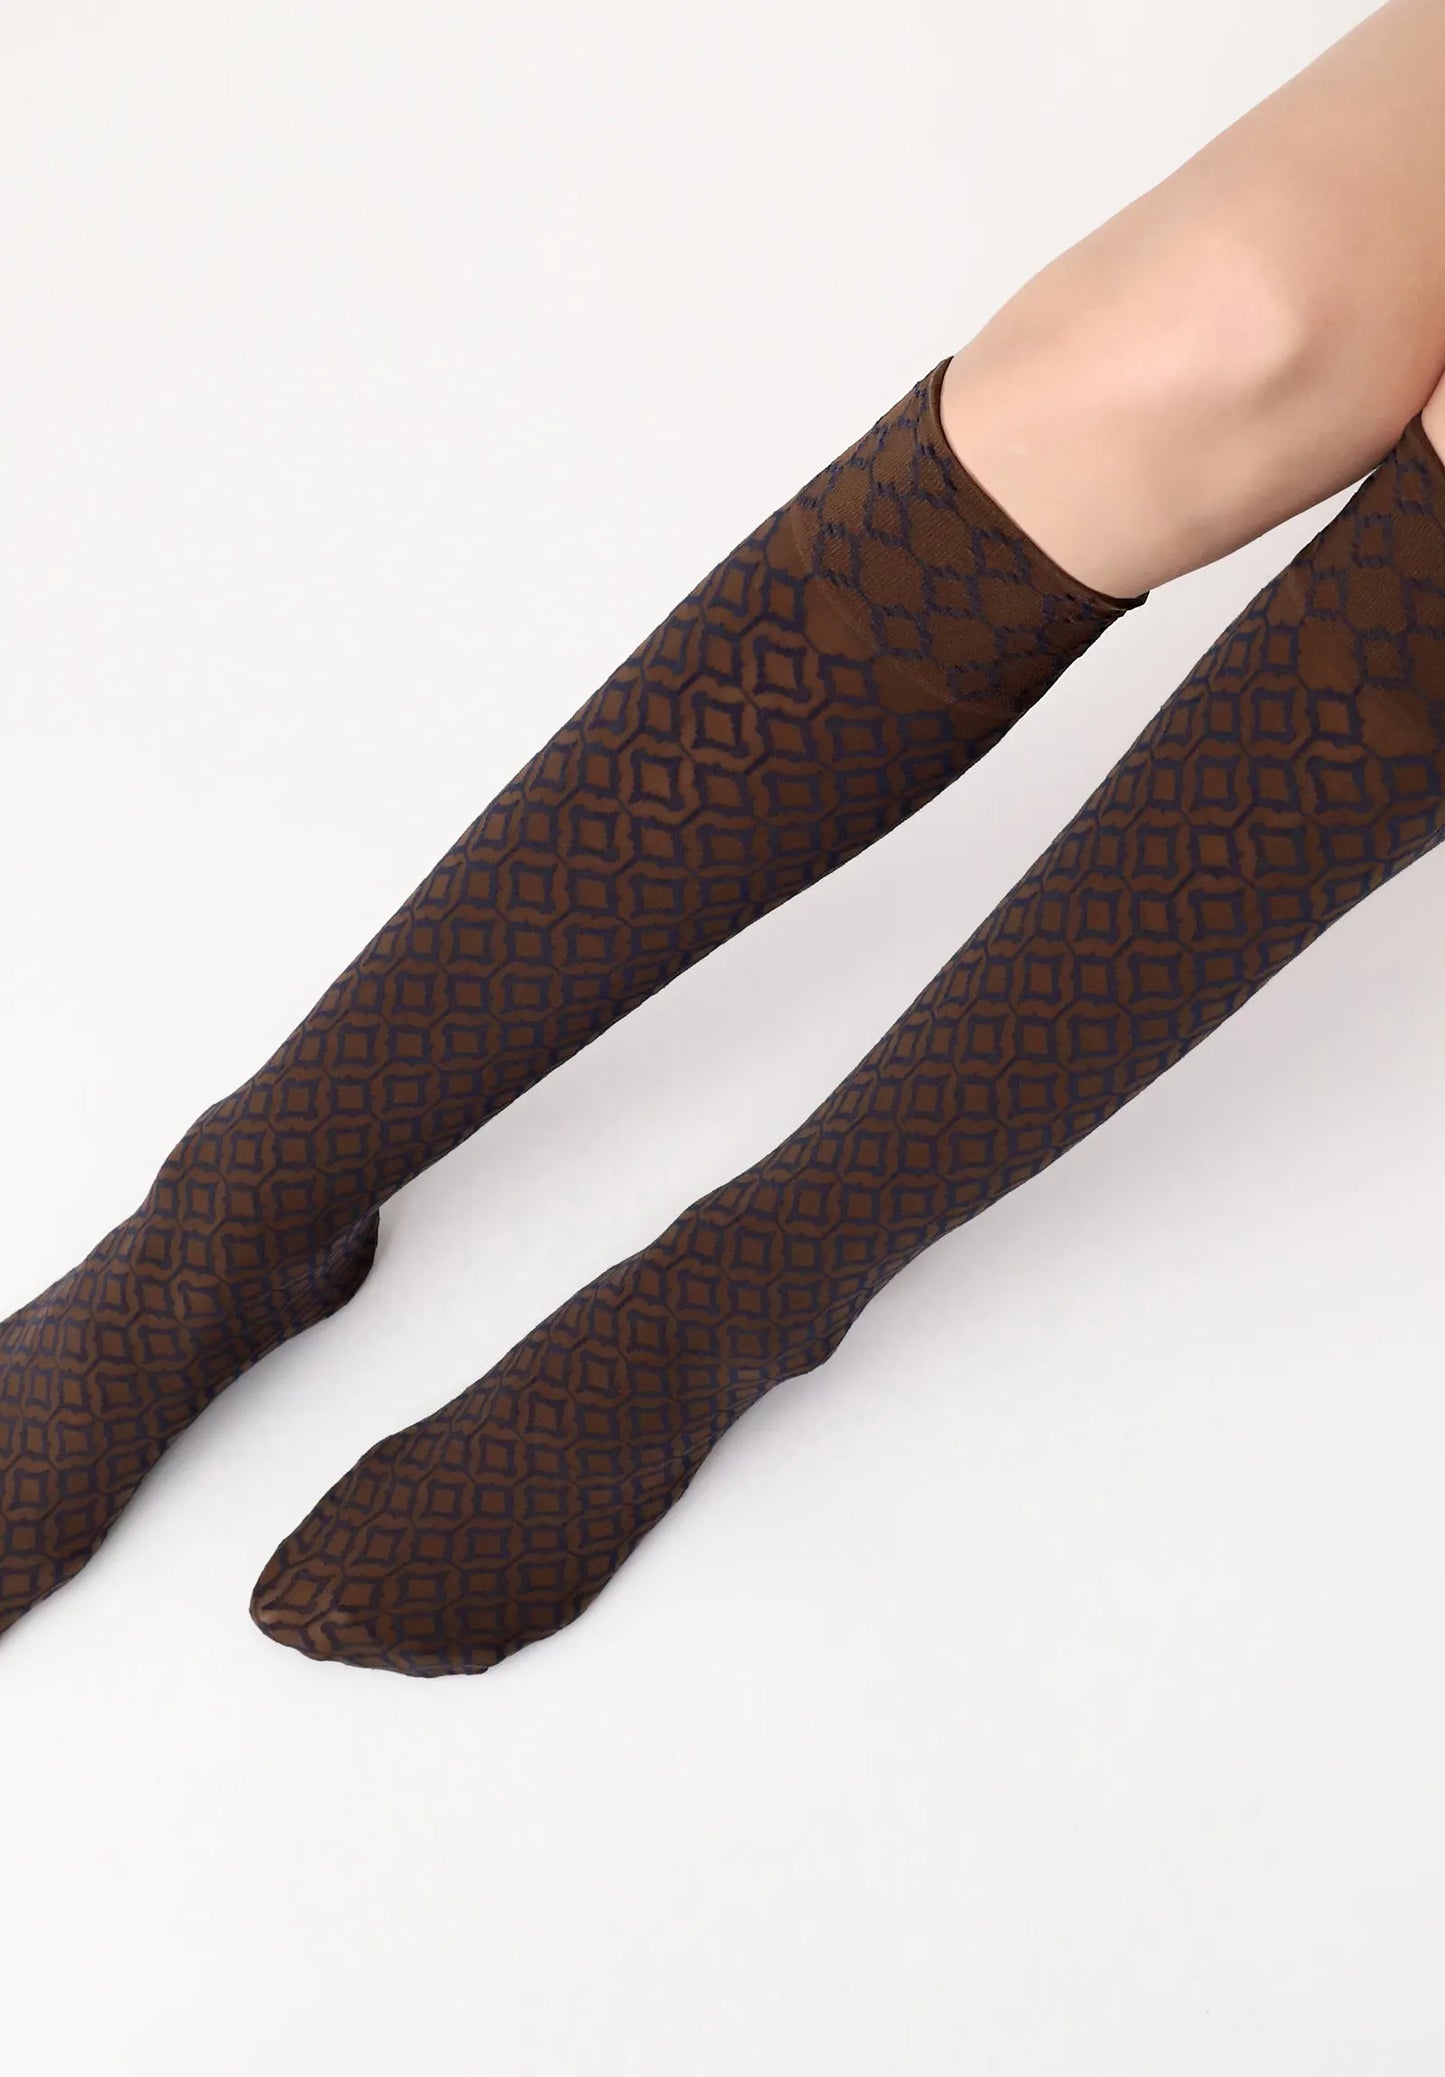 Oroblù I Love First Class Geomtric Gambaletto - Brown opaque fashion knee-high socks with a geometric diamond style pattern in navy